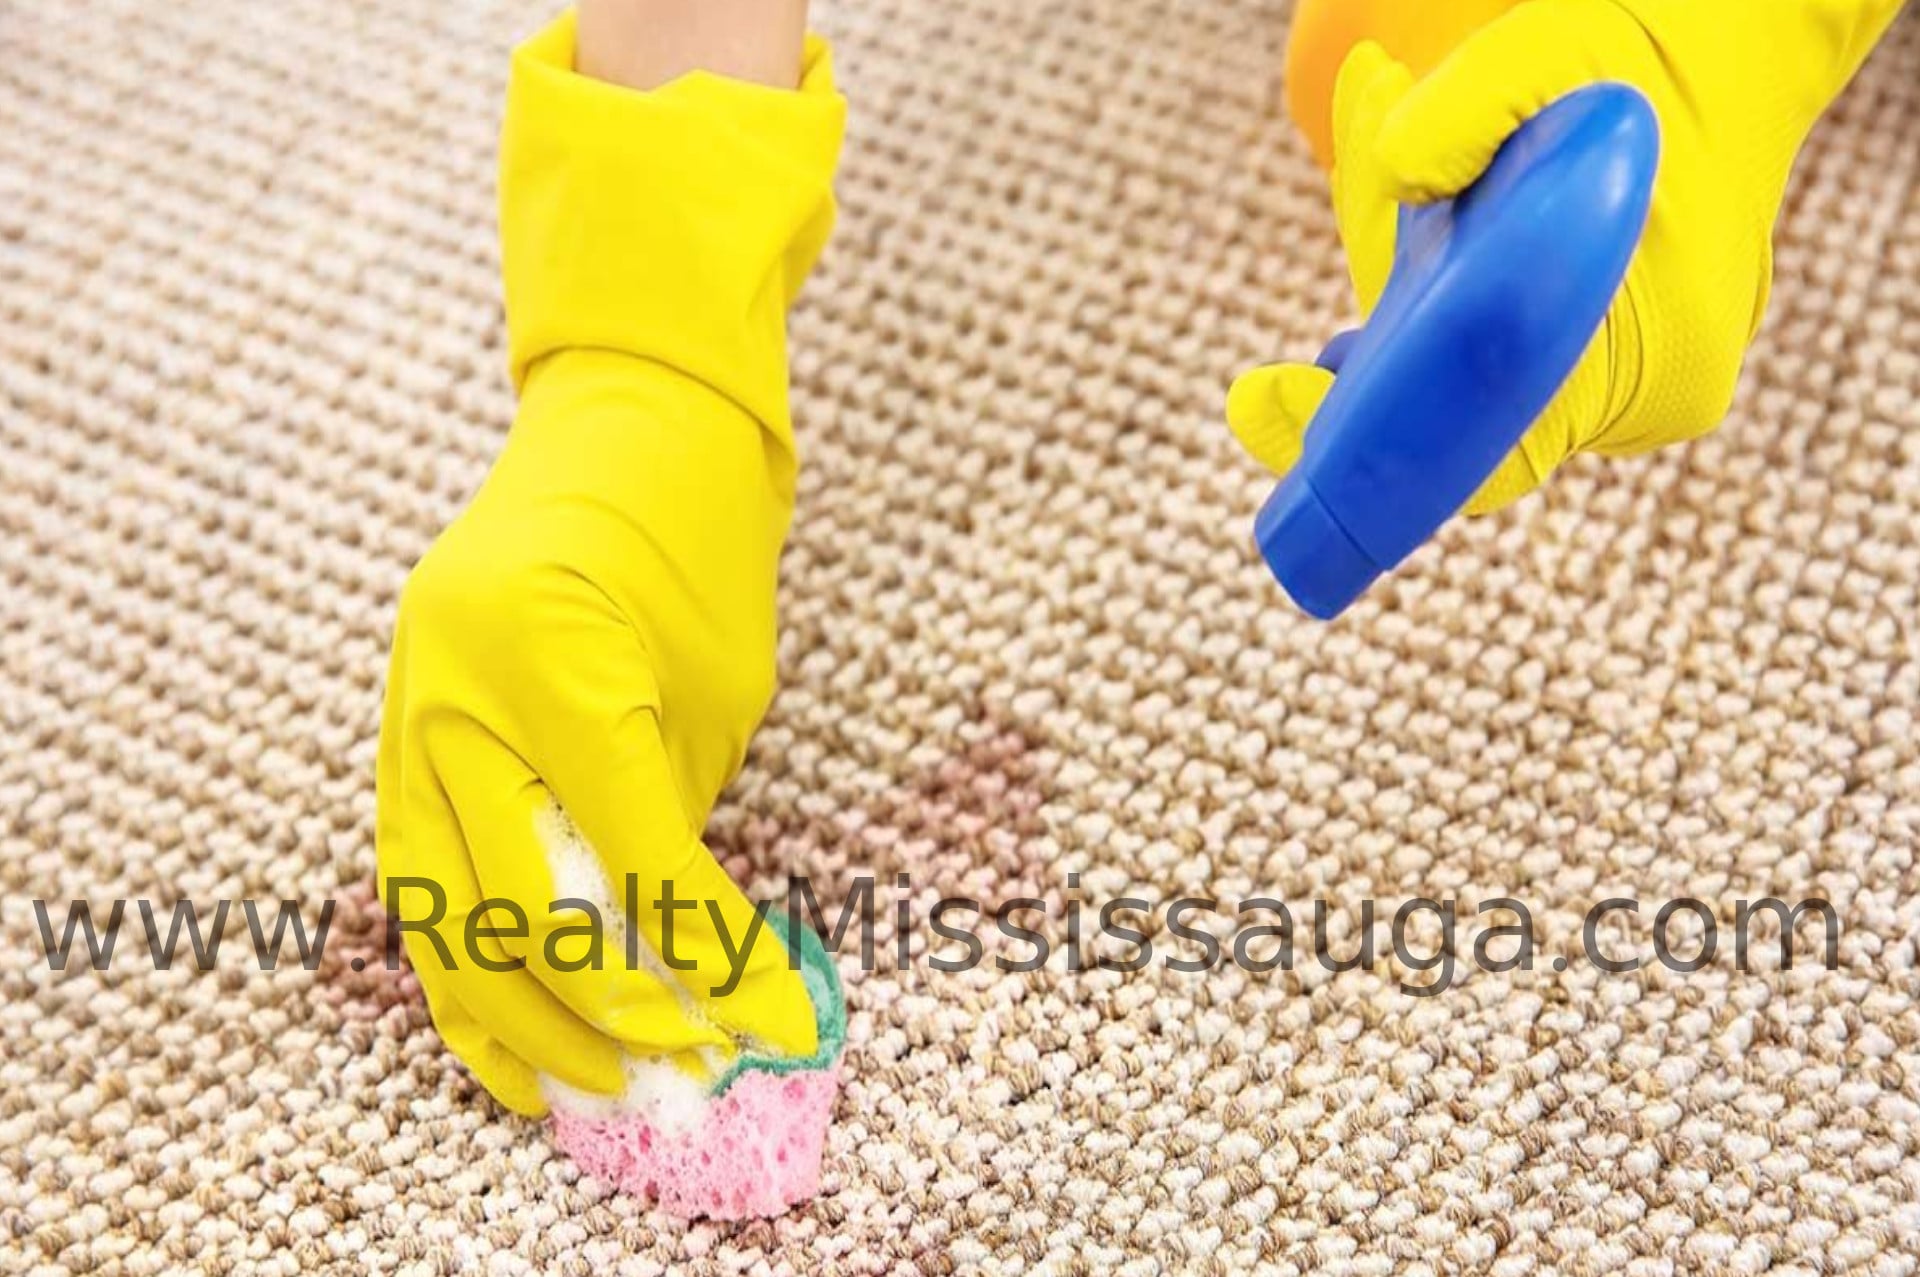 You are currently viewing Floor Cleaning and Stain Remover Services in Mississauga